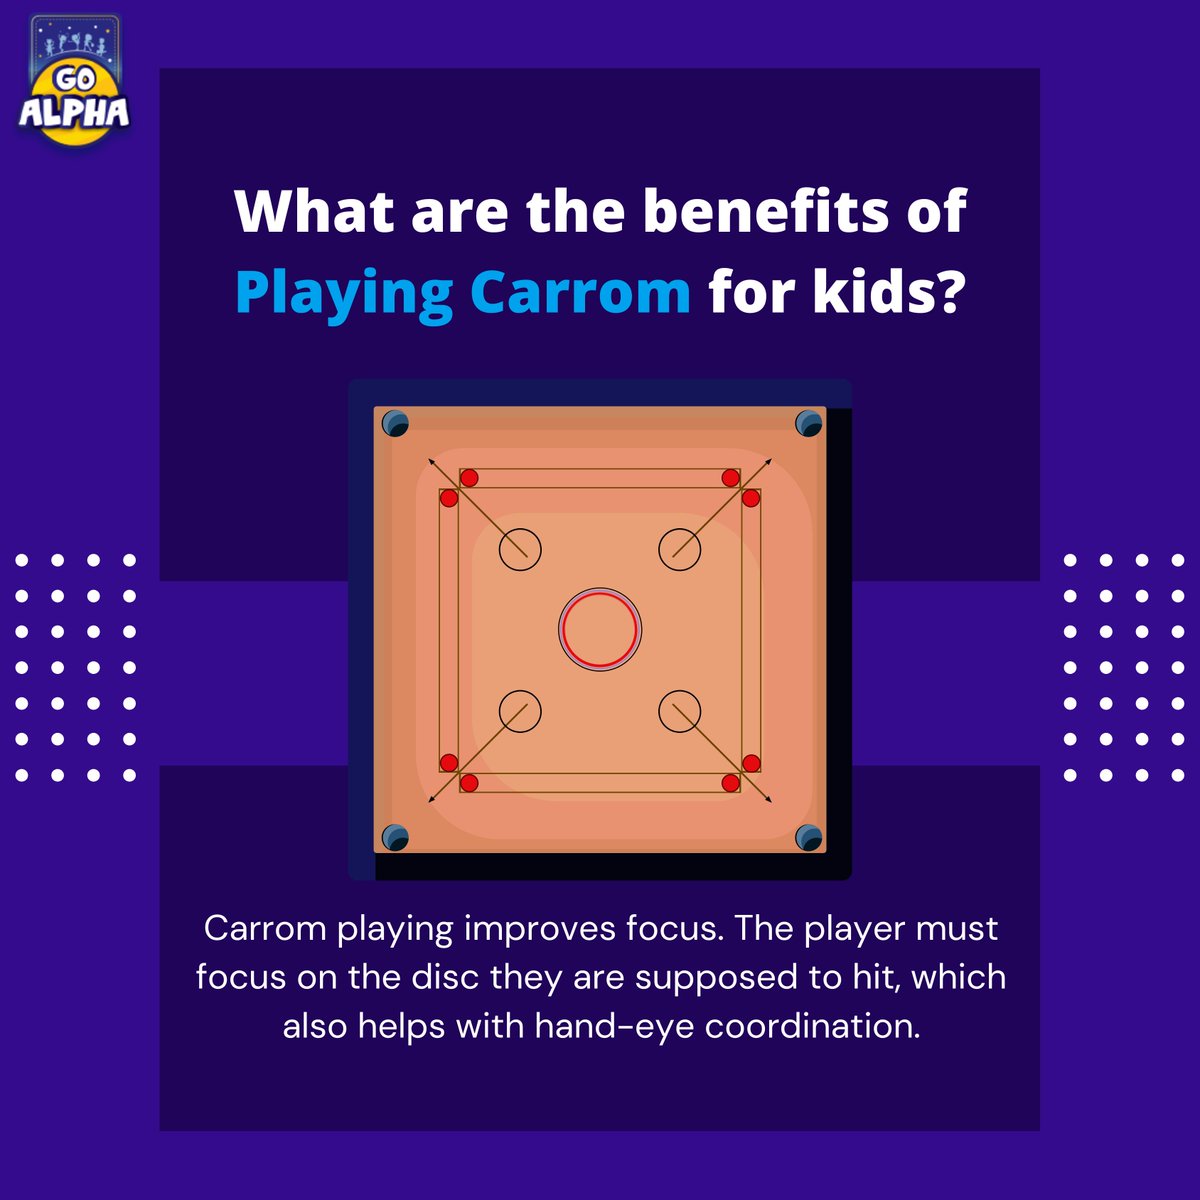 Carrom playing improves focus. The player must focus on the disc they are supposed to hit, which also helps with hand-eye coordination.

#sportsforkids #toddlertraining #learningwithfun #preschool #kidsnursery #kindergarten #education #earlychildhoodeducation #childcare